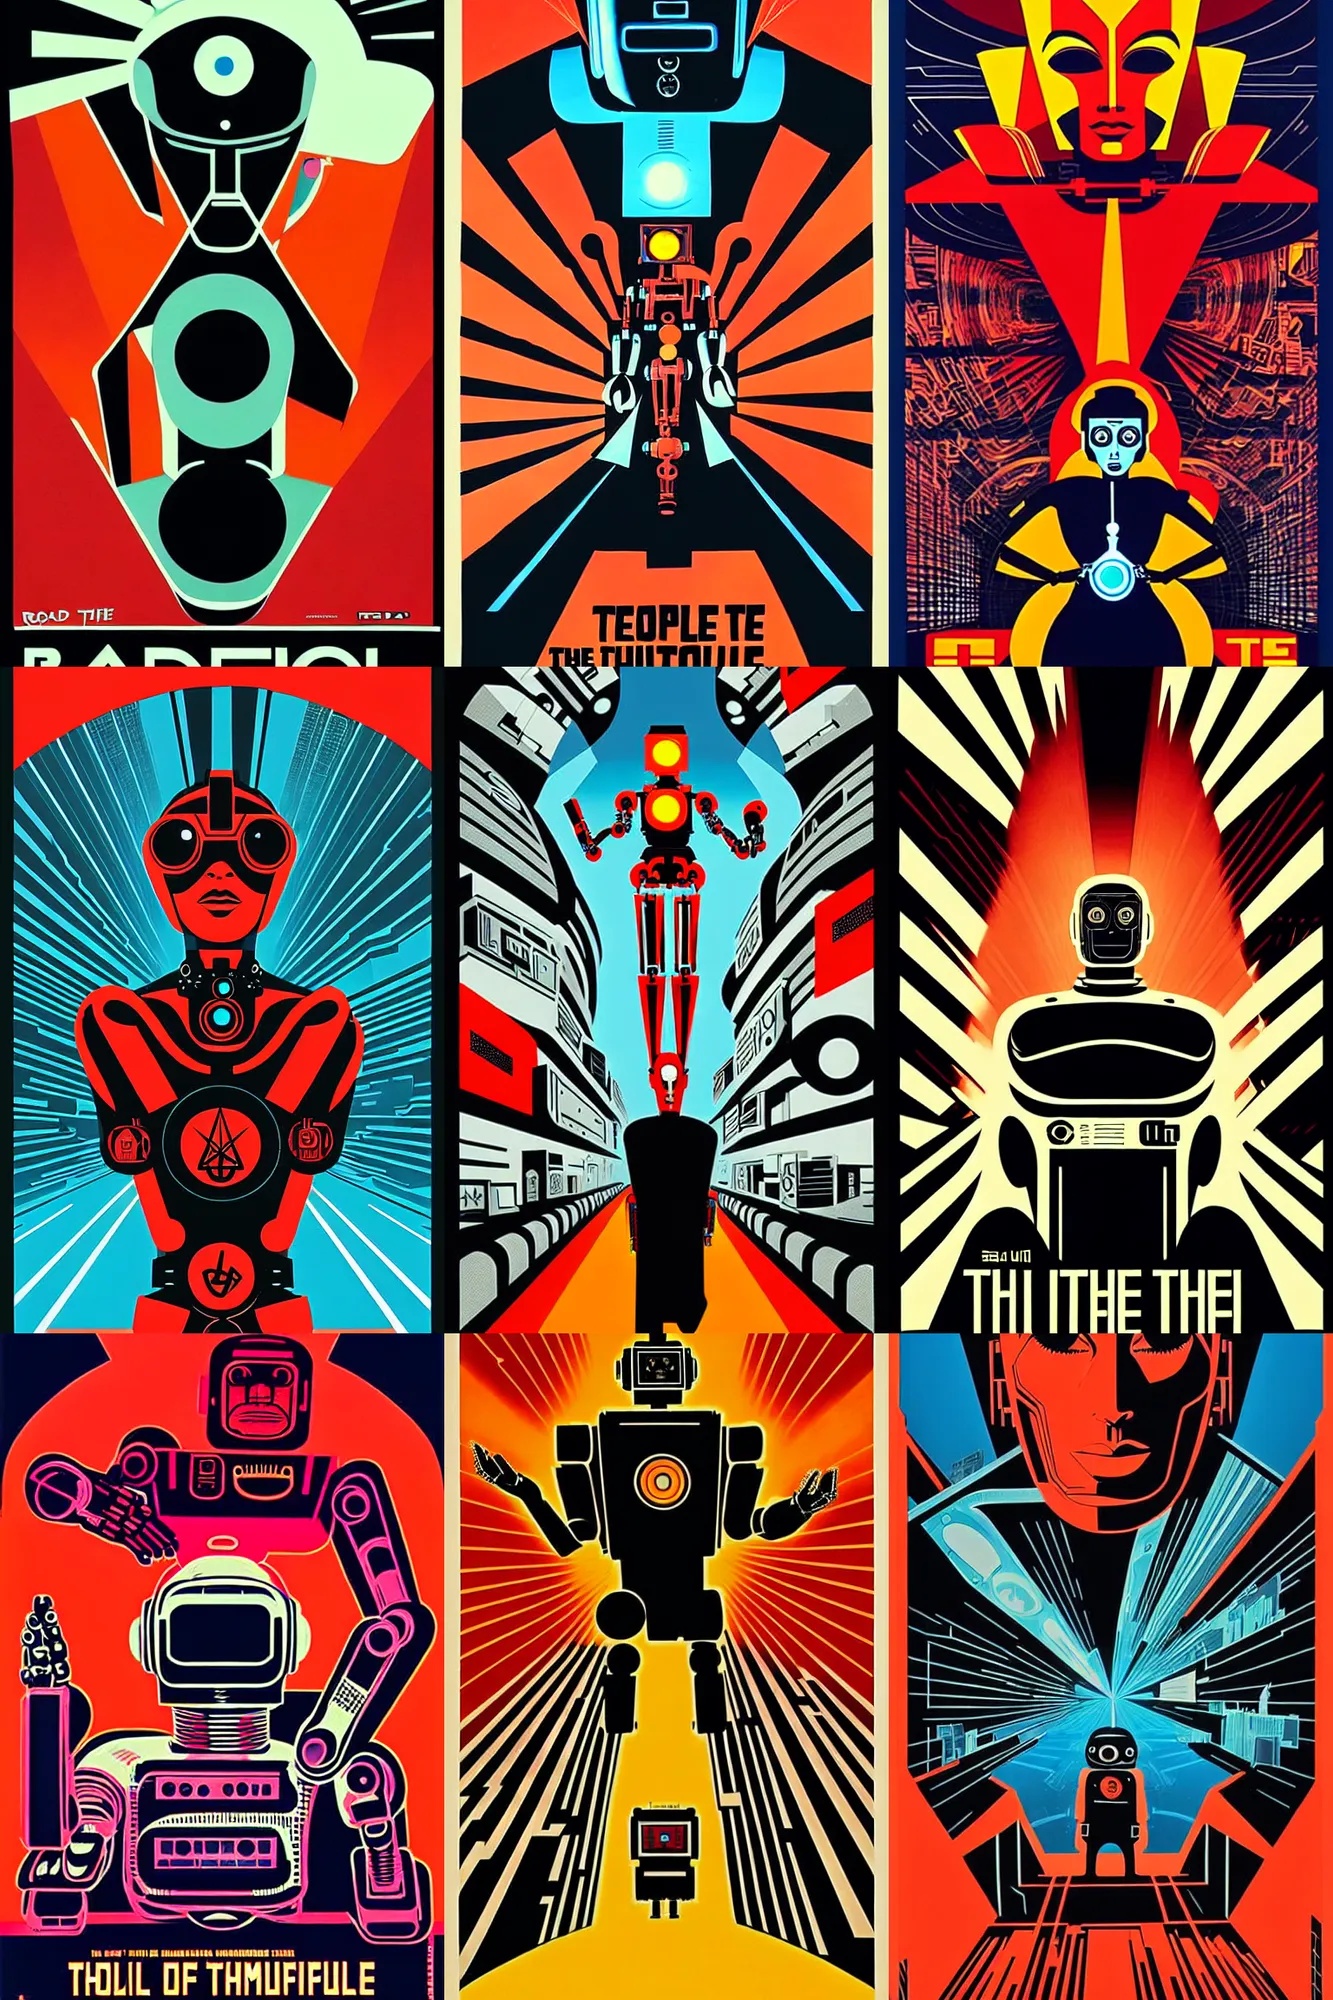 Prompt: road to the futuristic temple movie poster film by saul bass and shepard fairey and emma rios, cyborg cyberpunk robot